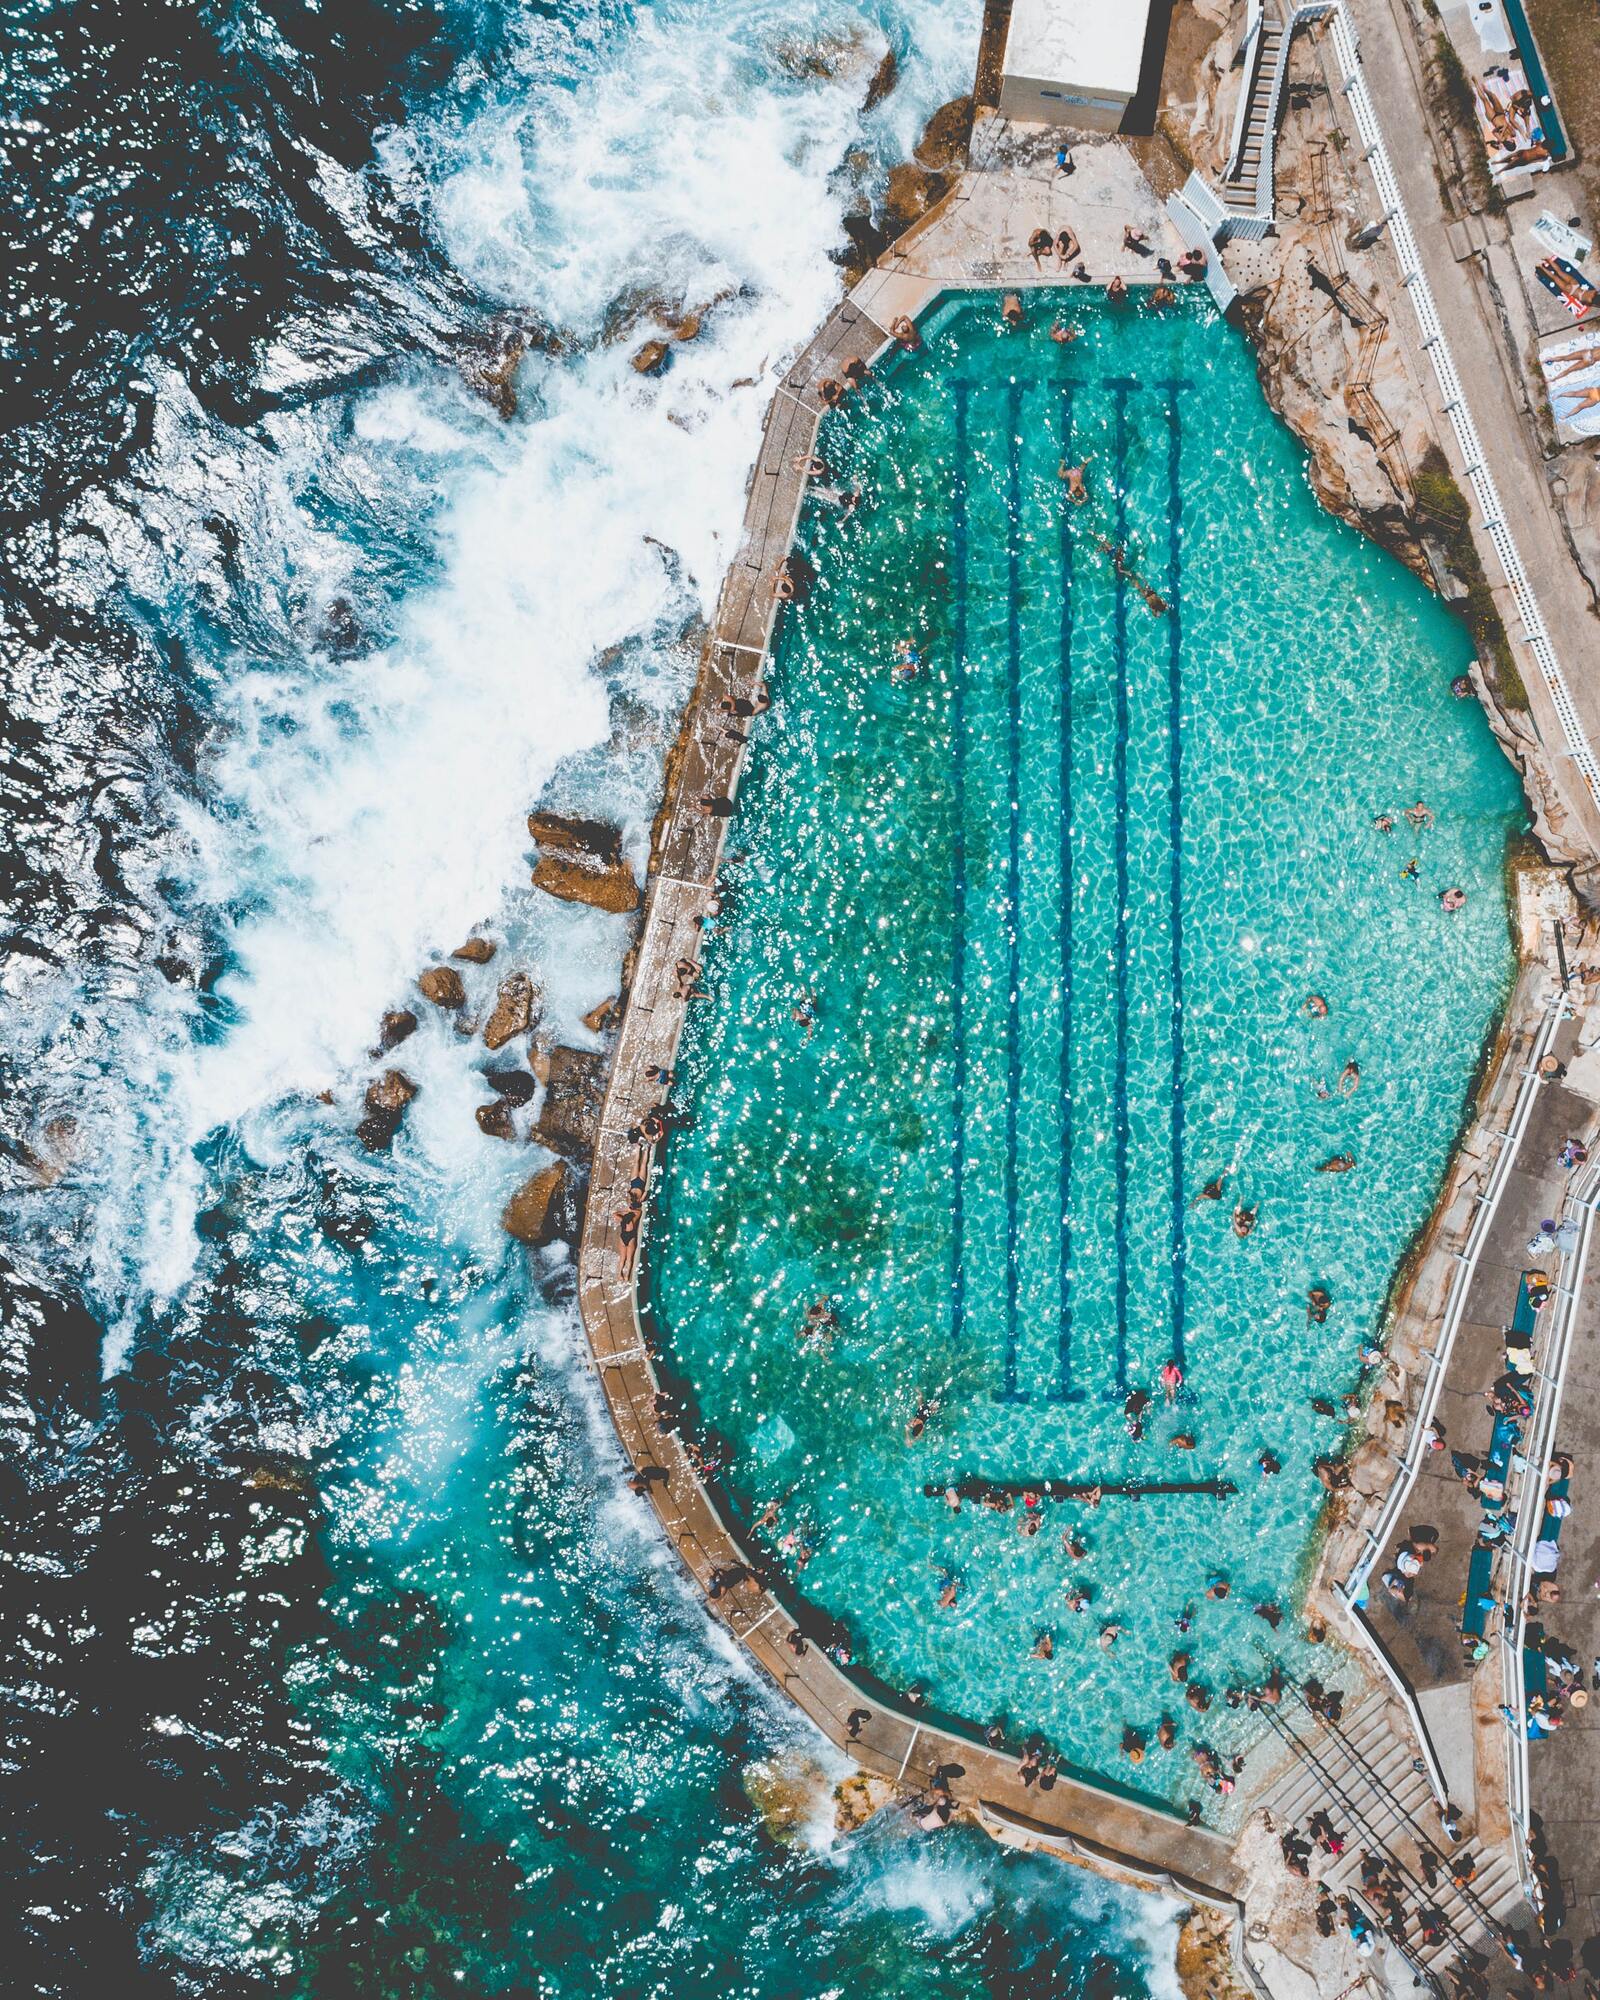 <p>Bronte beach is simply spectacular. It is located in Sydney and has an incredible natural stone pool where bathers can enjoy a swim. For people who spend part of their holiday in Sydney, this is the go-to place to enjoy a day at the beach.</p> <p>Photo: Sacha Styles / Unsplash</p>